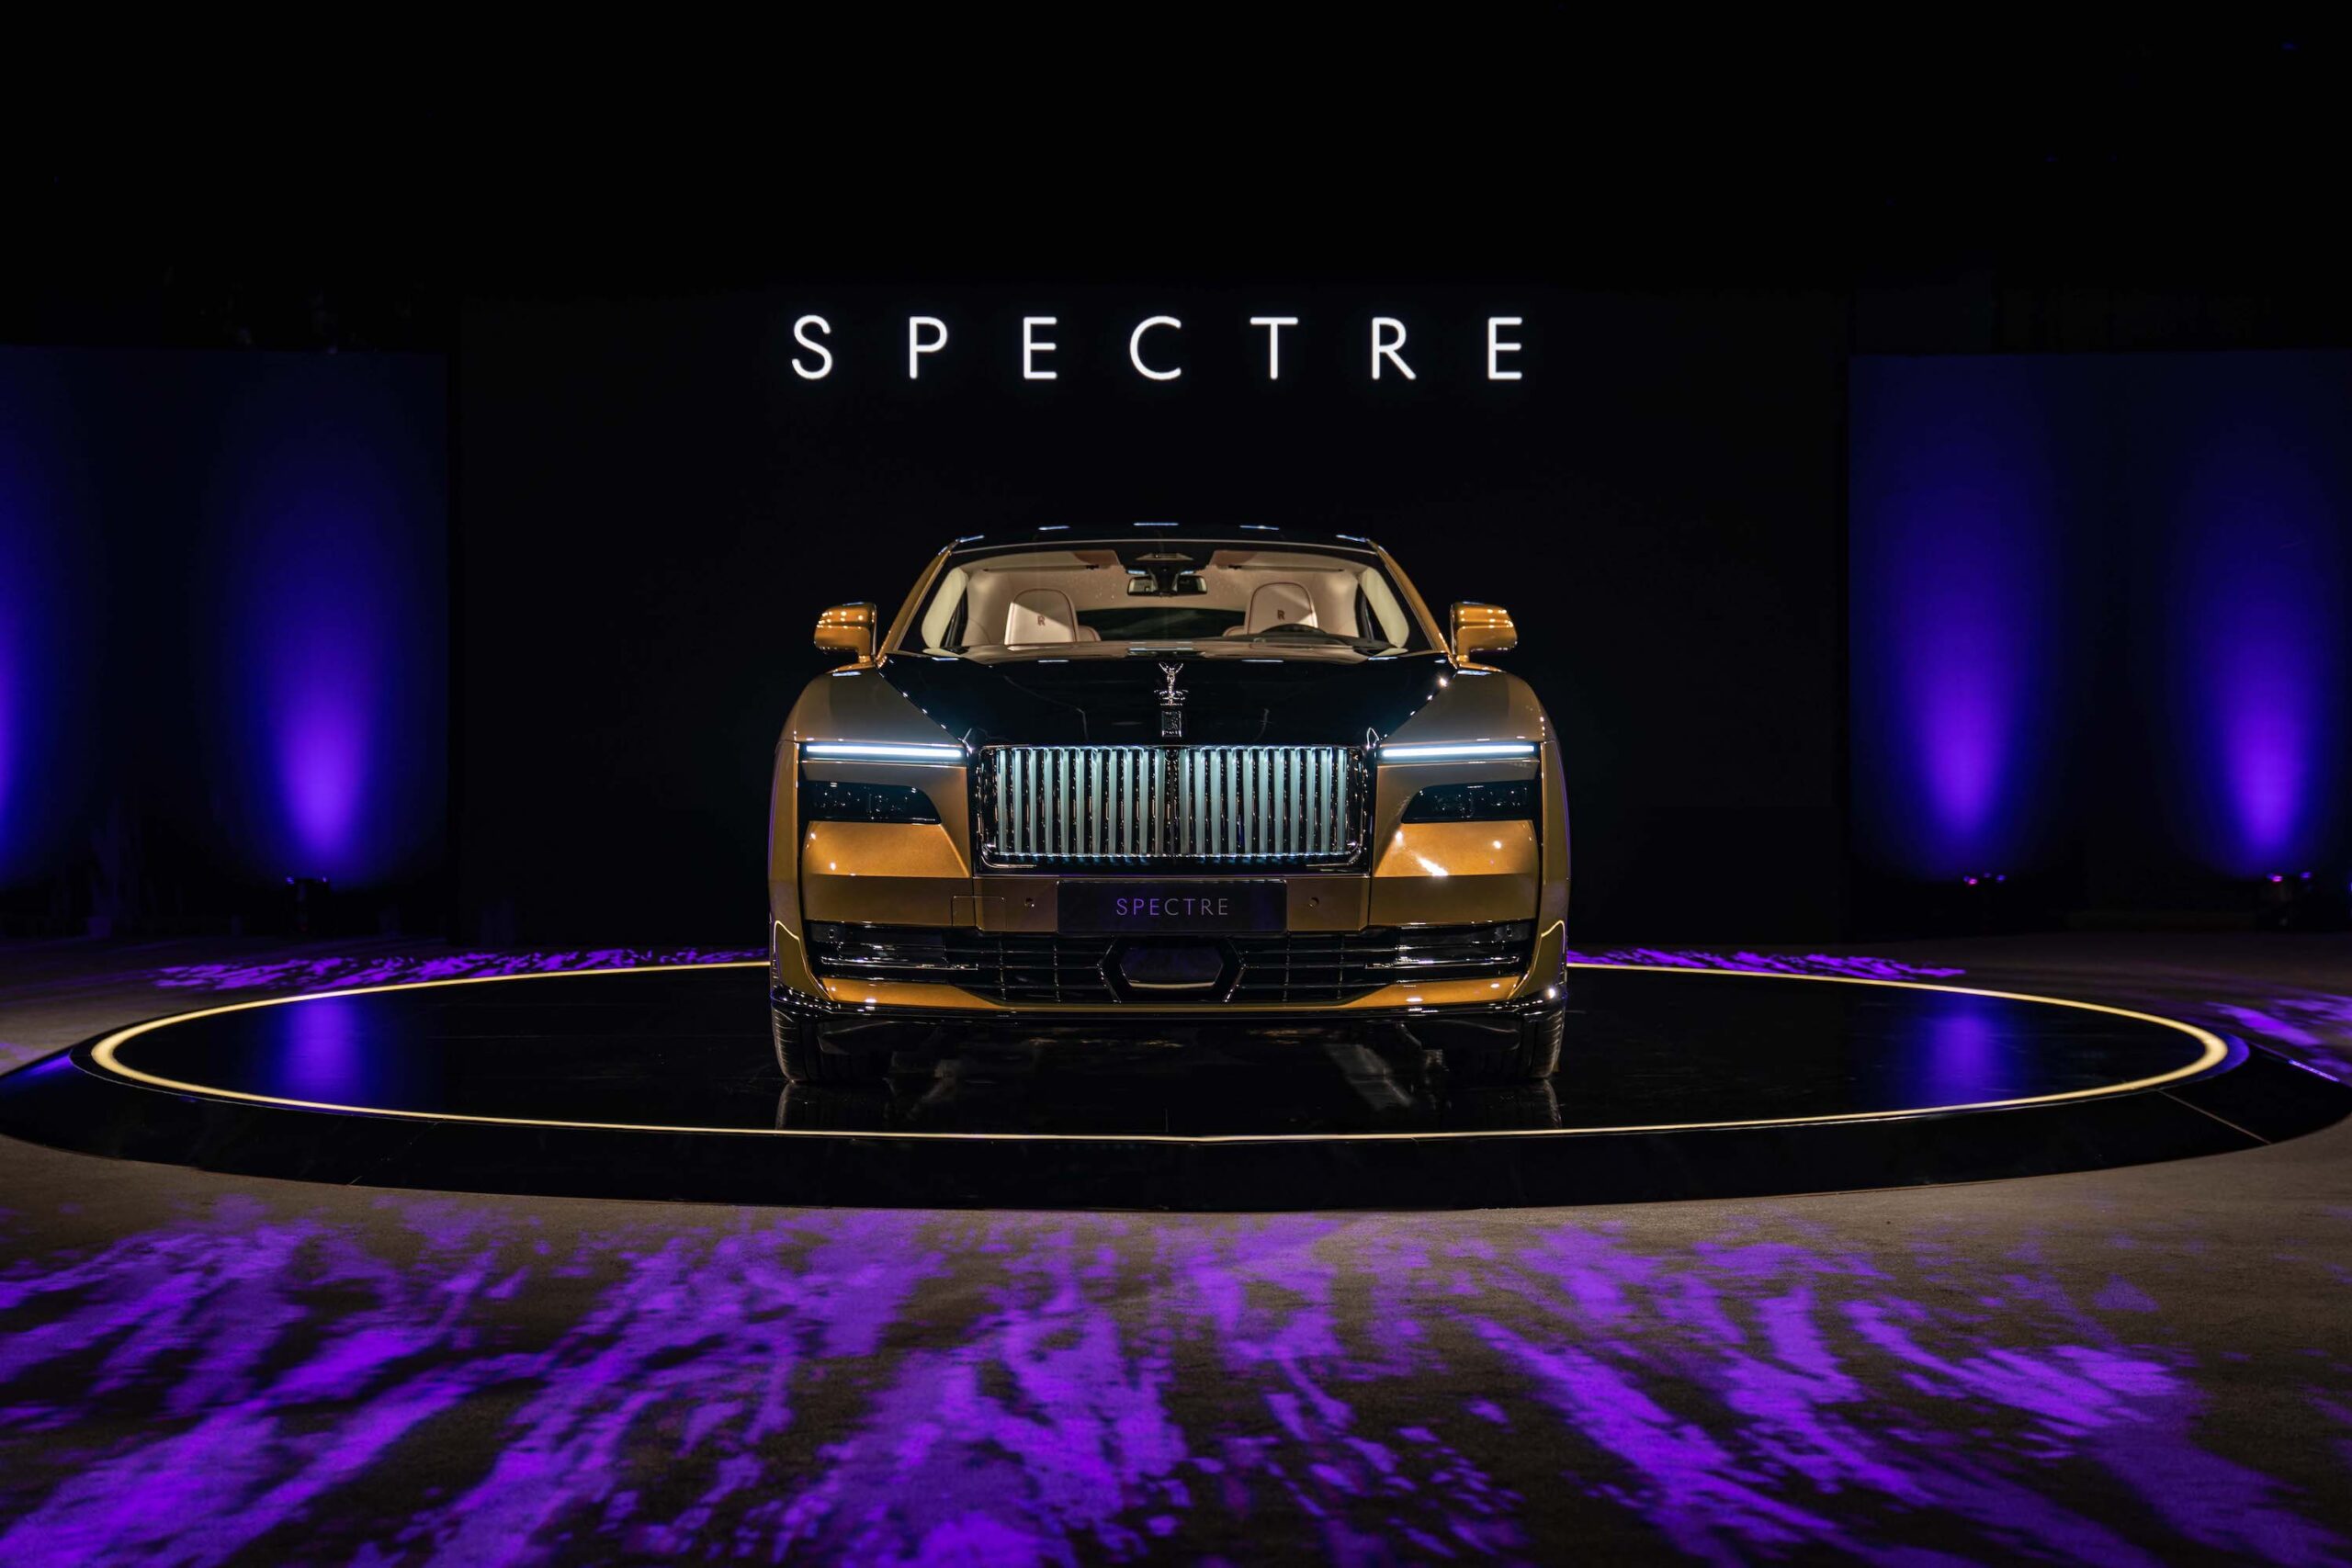 ROLLS-ROYCE SPECTRE UNVEILED: THE MARQUE'S FIRST FULLY-ELECTRIC